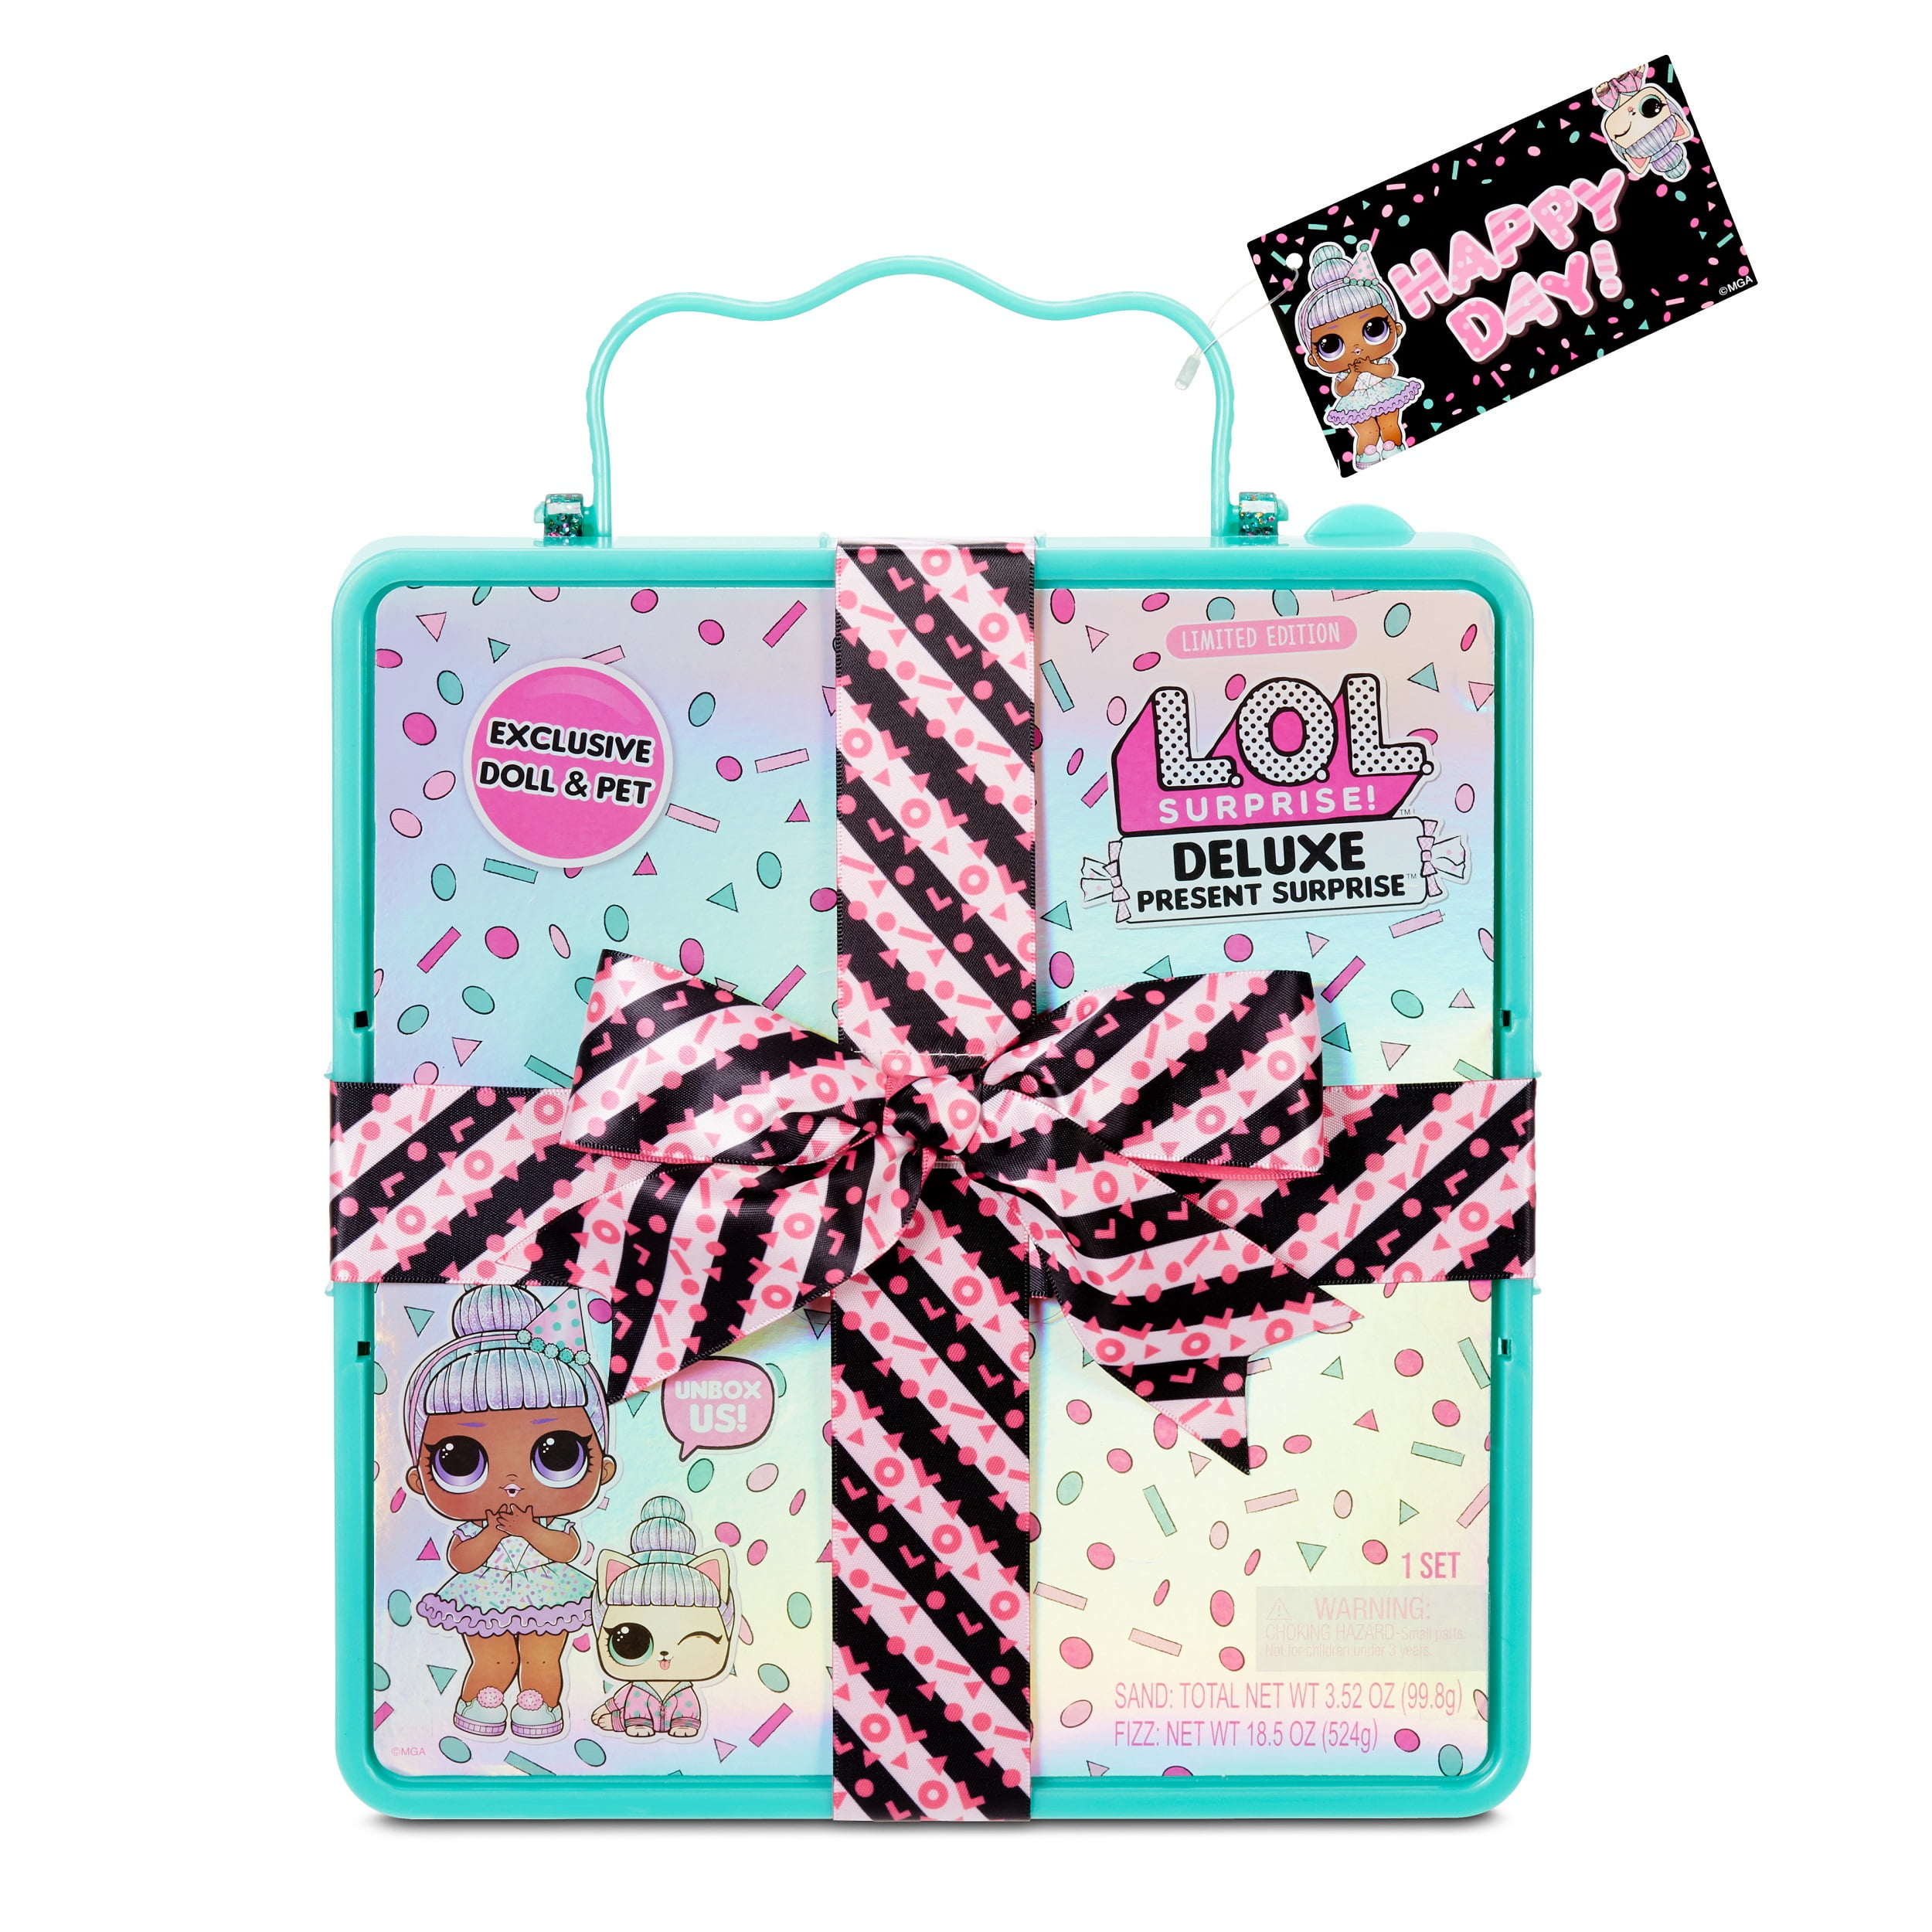 L.O.L. Surprise! Deluxe Present Surprise with Limited Edition Sprinkles Doll and Pet